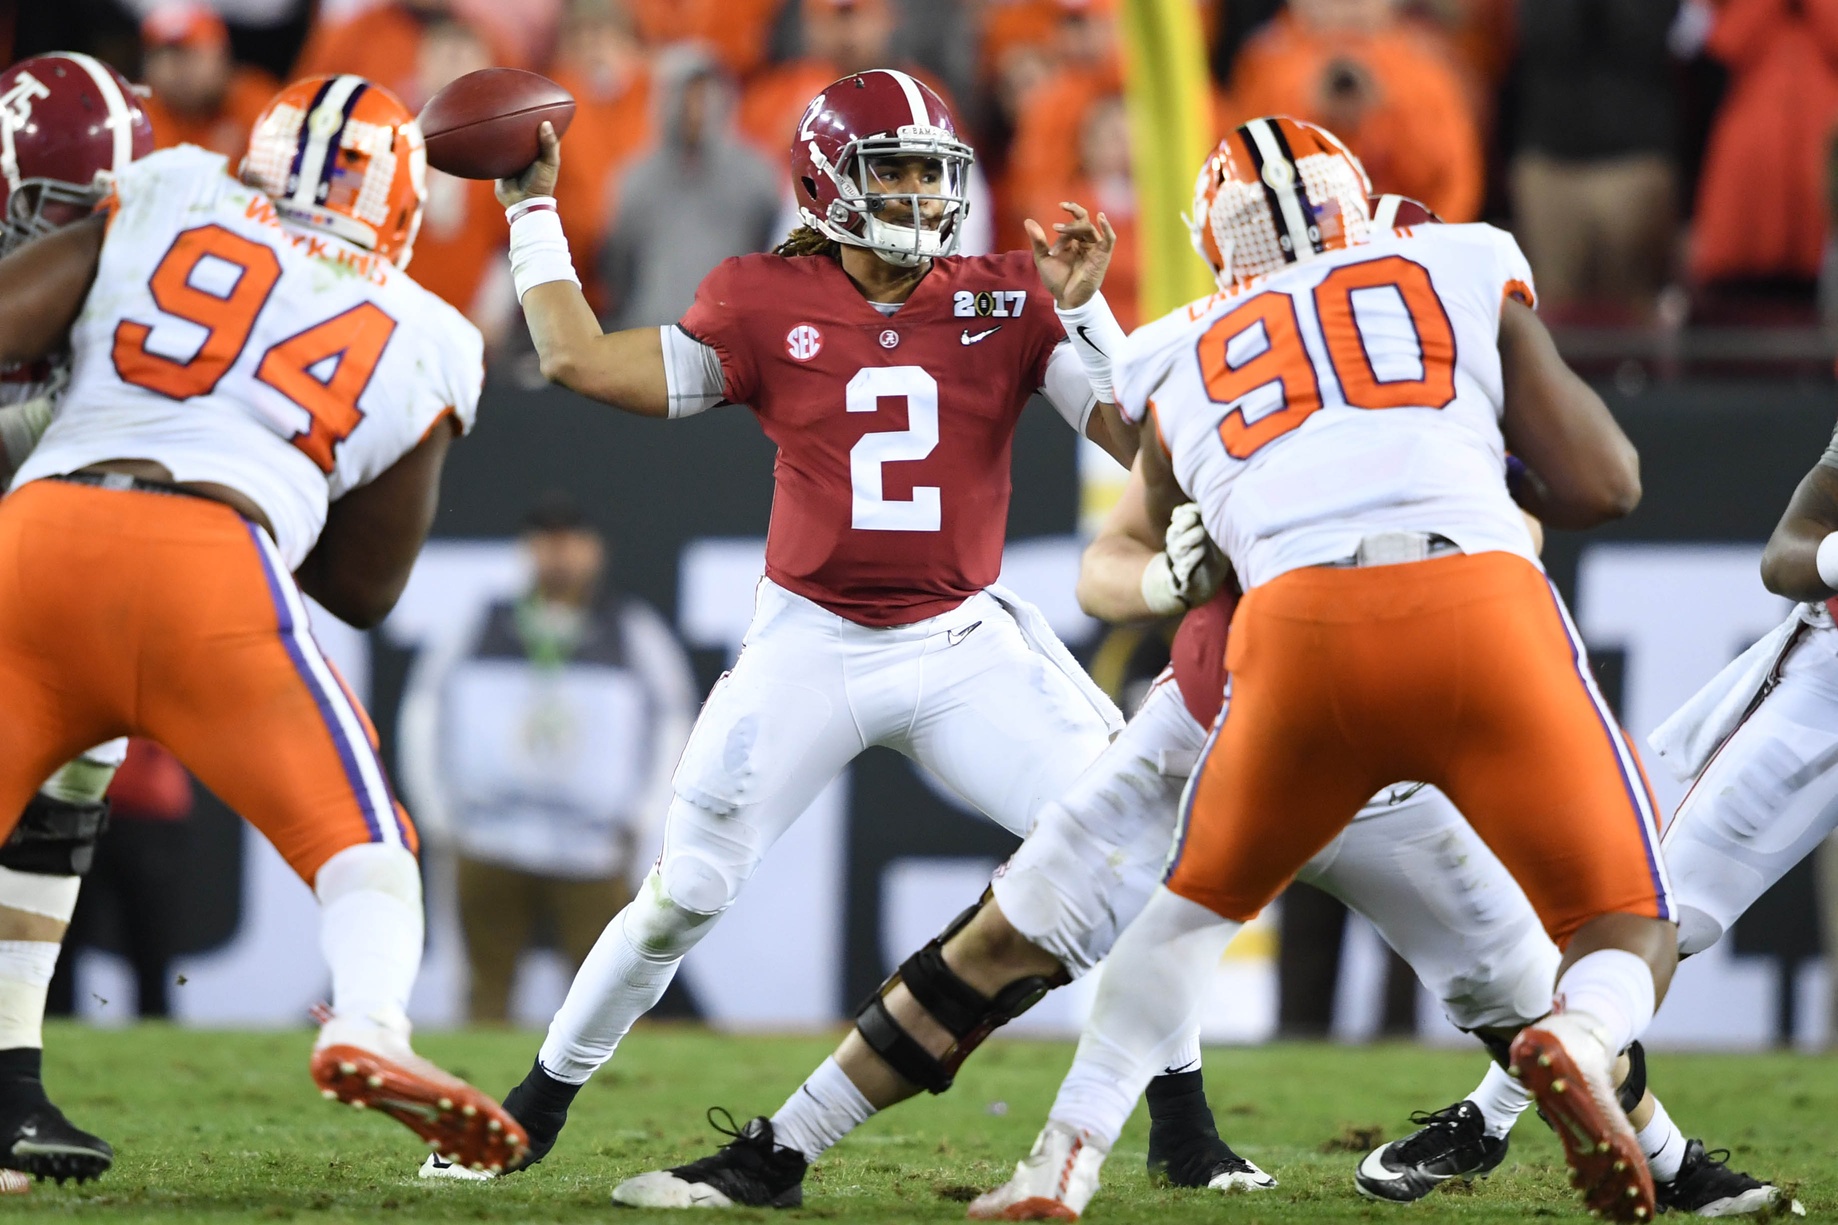 Jan 9, 2017; Tampa, FL, USA; Alabama Crimson Tide quarterback Jalen Hurts (2) looks to pass during the fourth quarter against the Clemson Tigers in the 2017 College Football Playoff National Championship Game at Raymond James Stadium. Mandatory Credit: John David Mercer-USA TODAY Sports